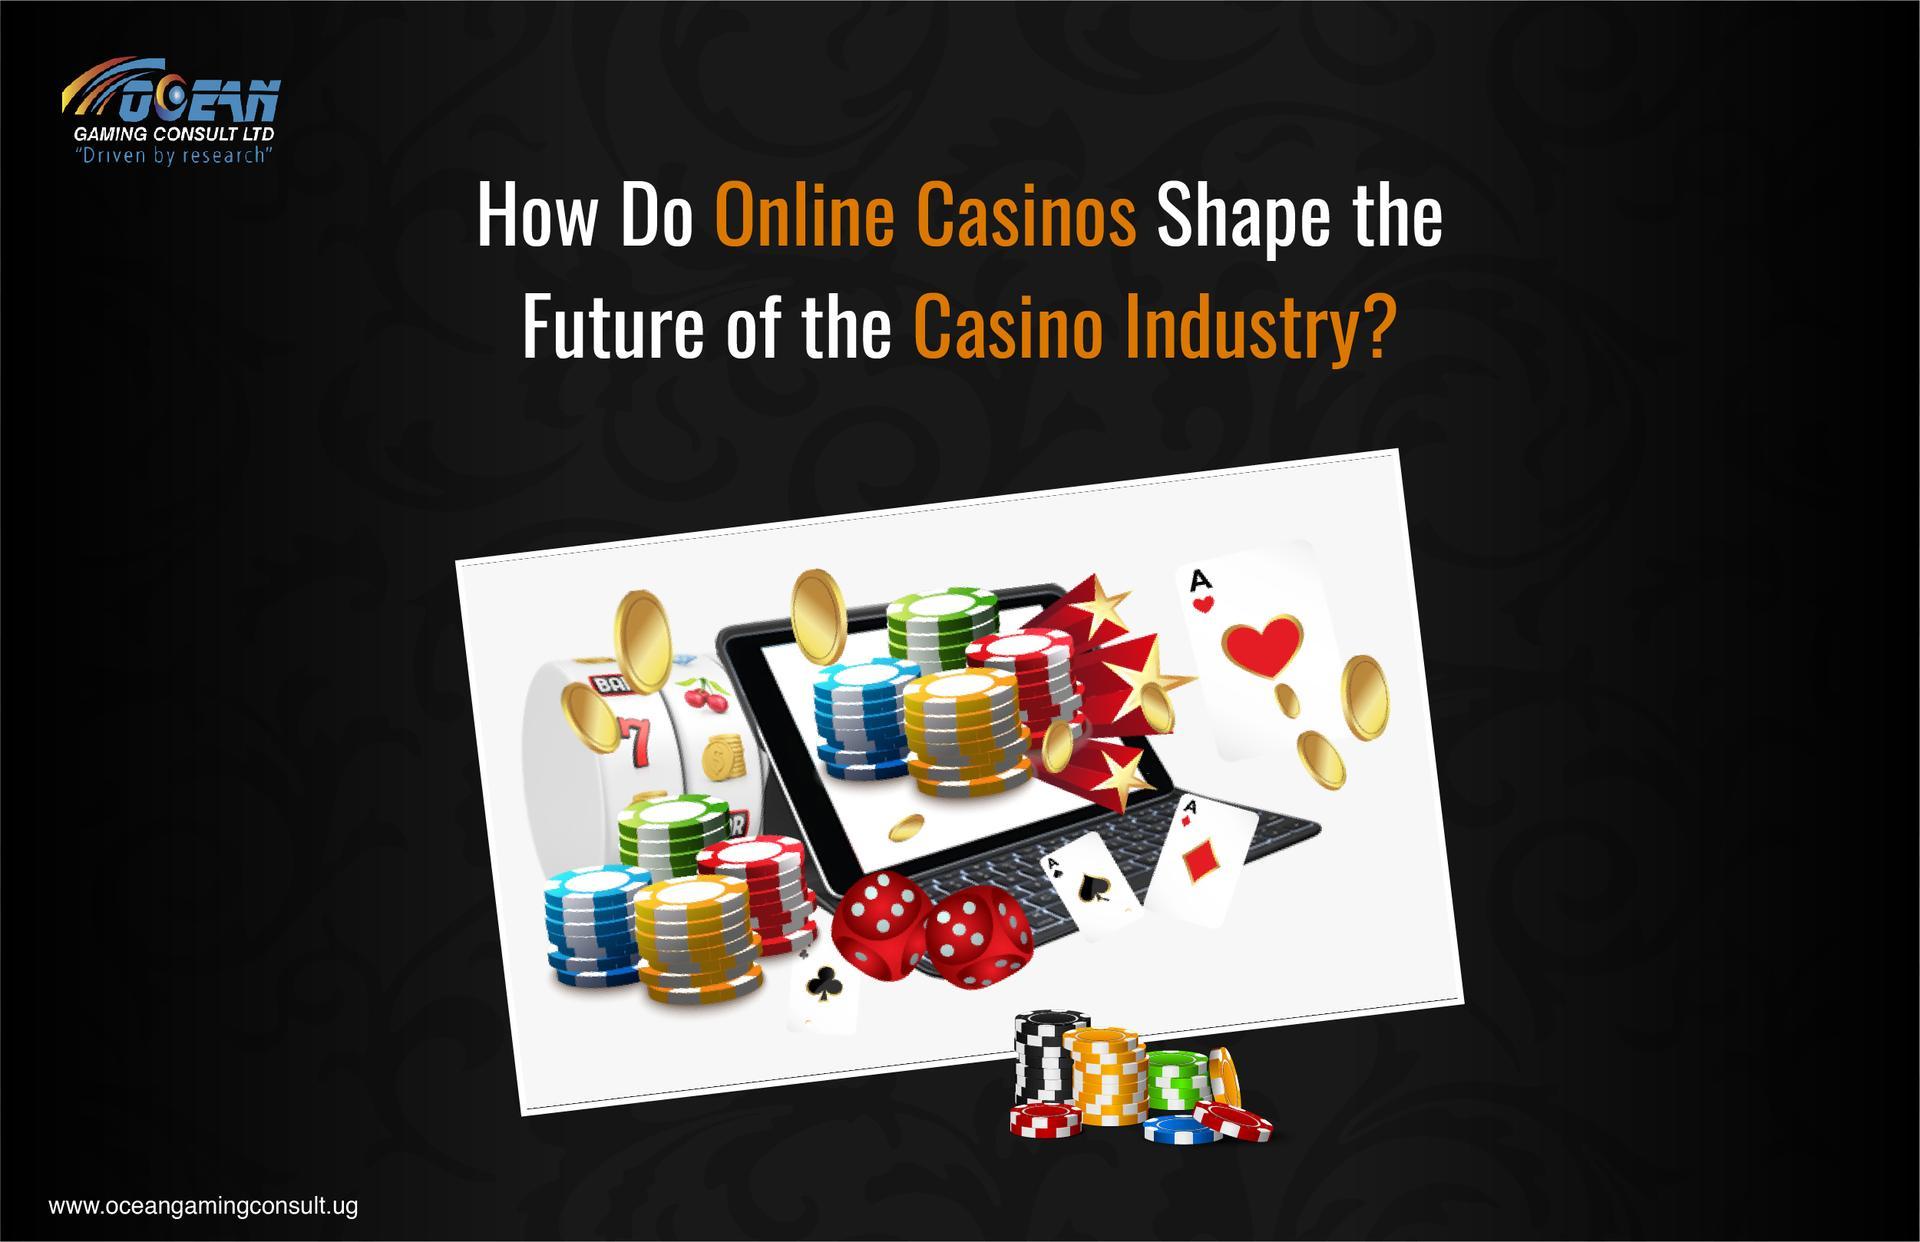 How Do Online Casino Companies Shape the Future of the Casino Industry?